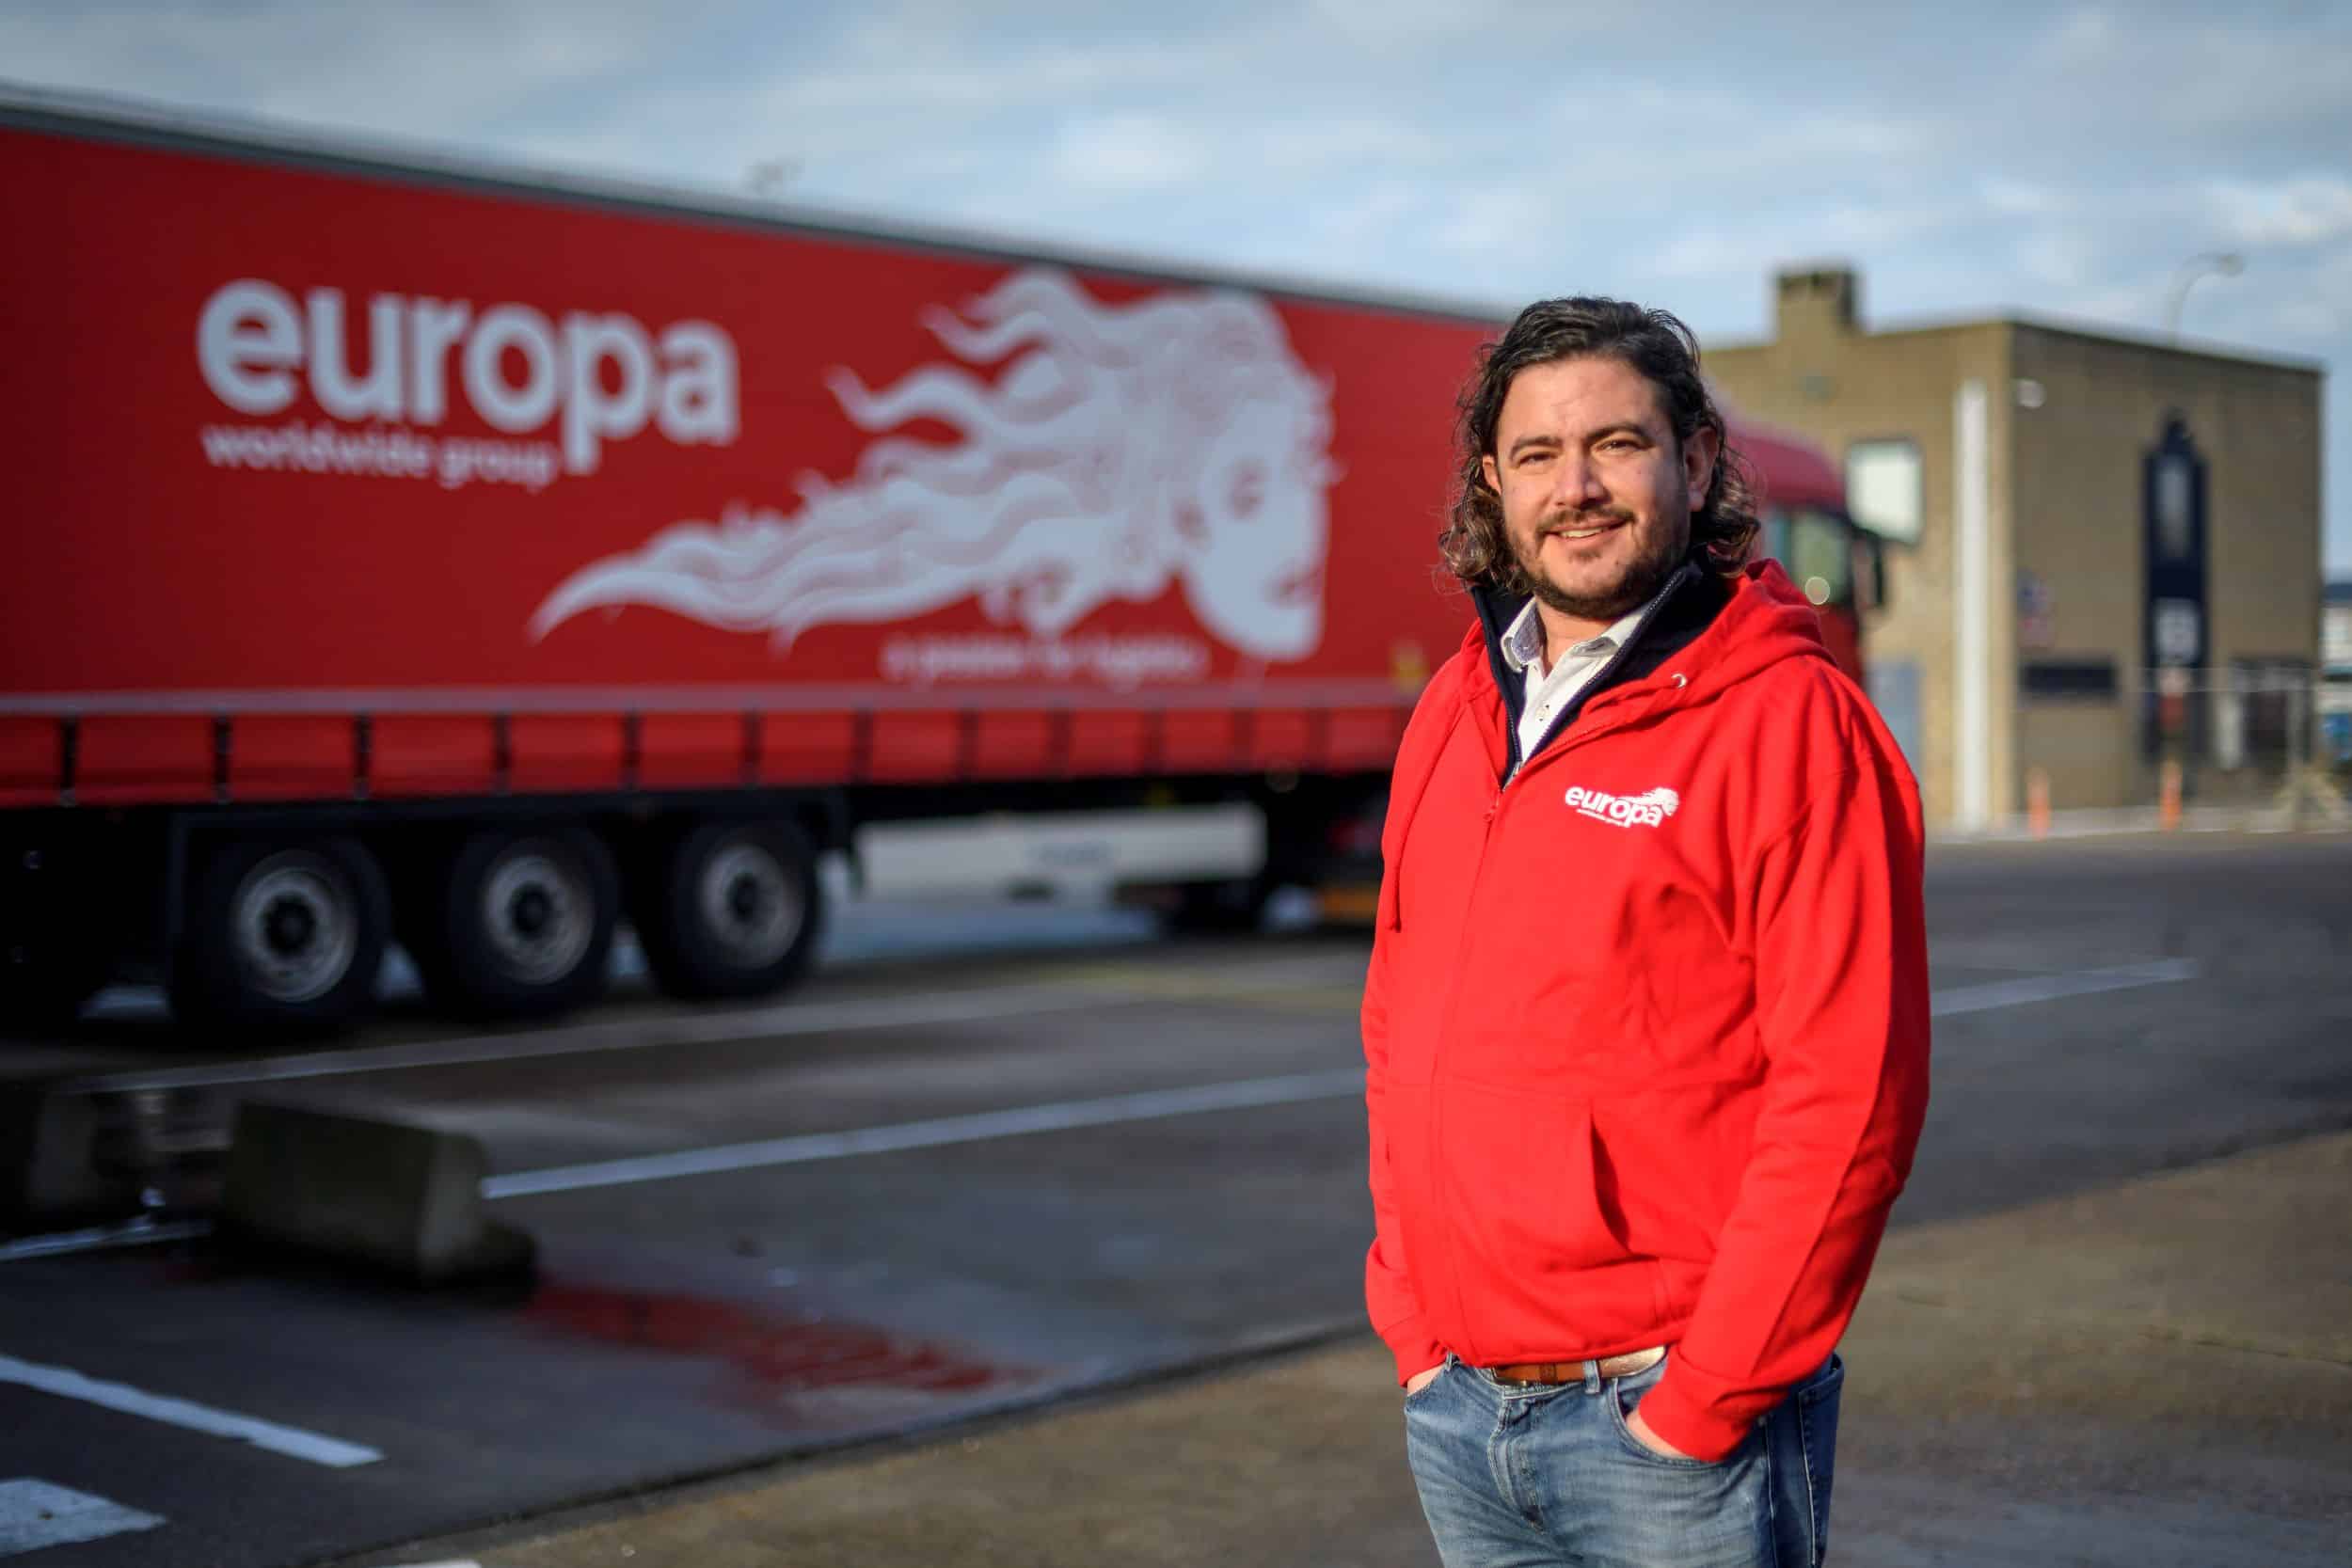 Carlo Turner stands in front of a Europa truck